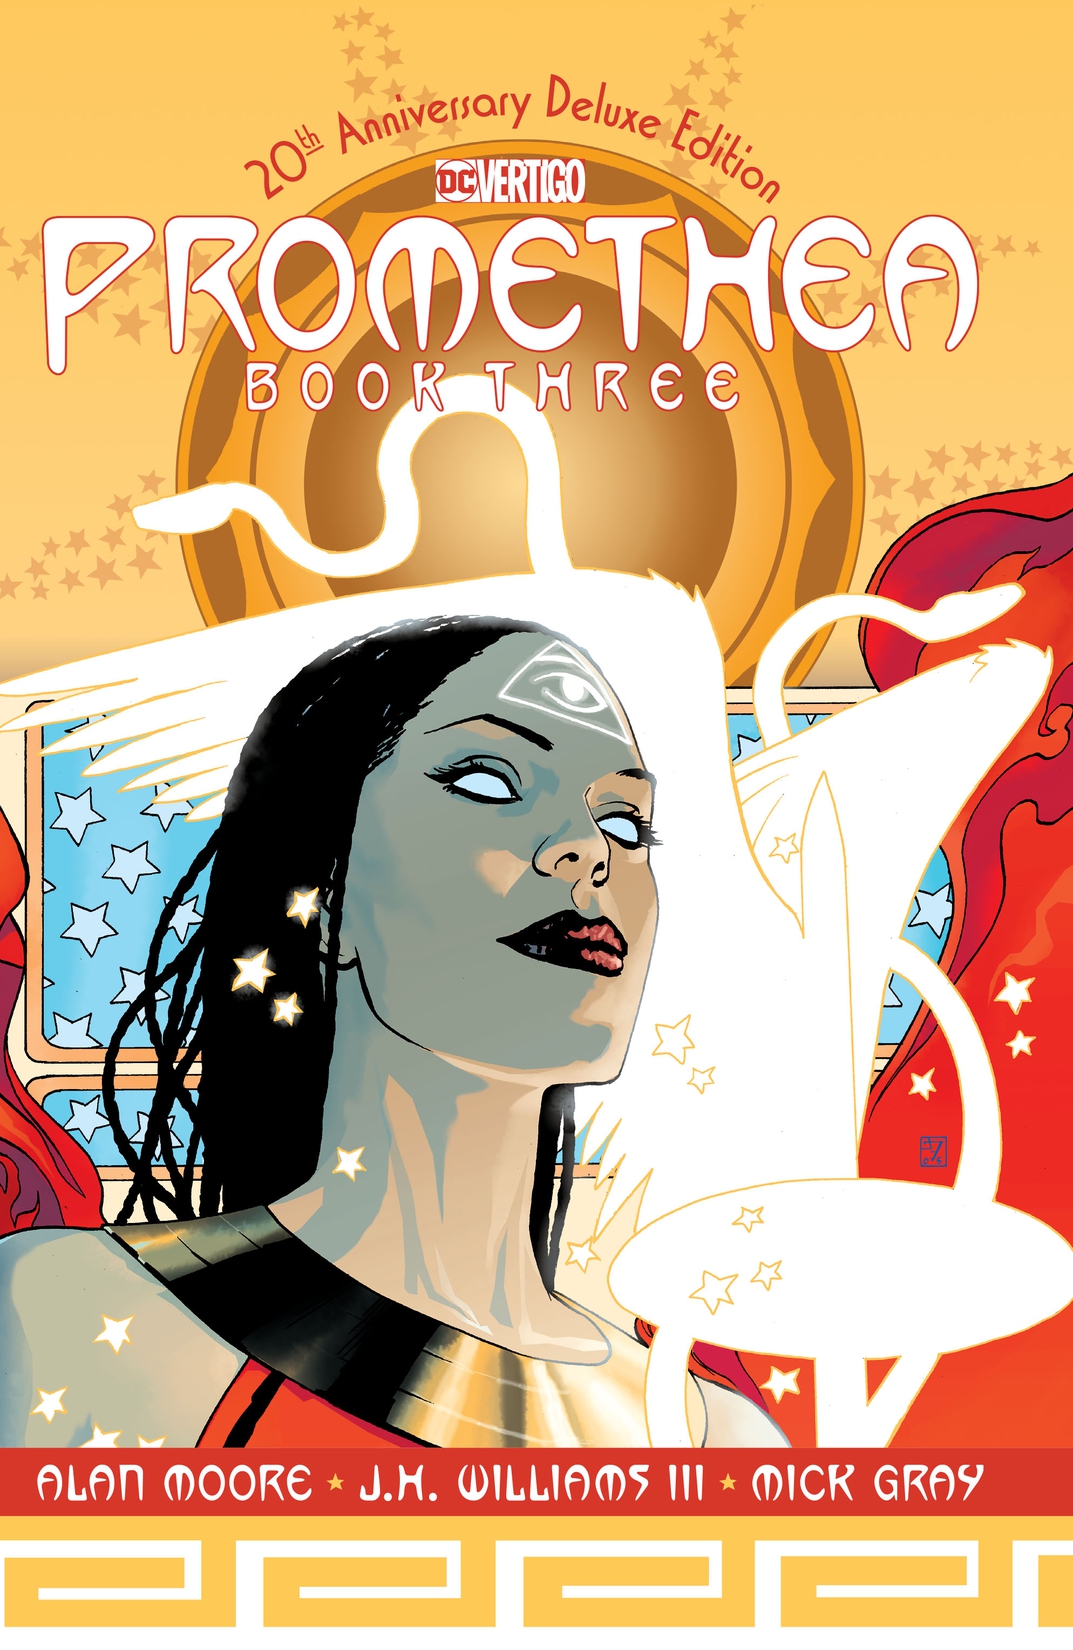 Promethea: The 20th Anniversary Deluxe Edition Book Three preview images